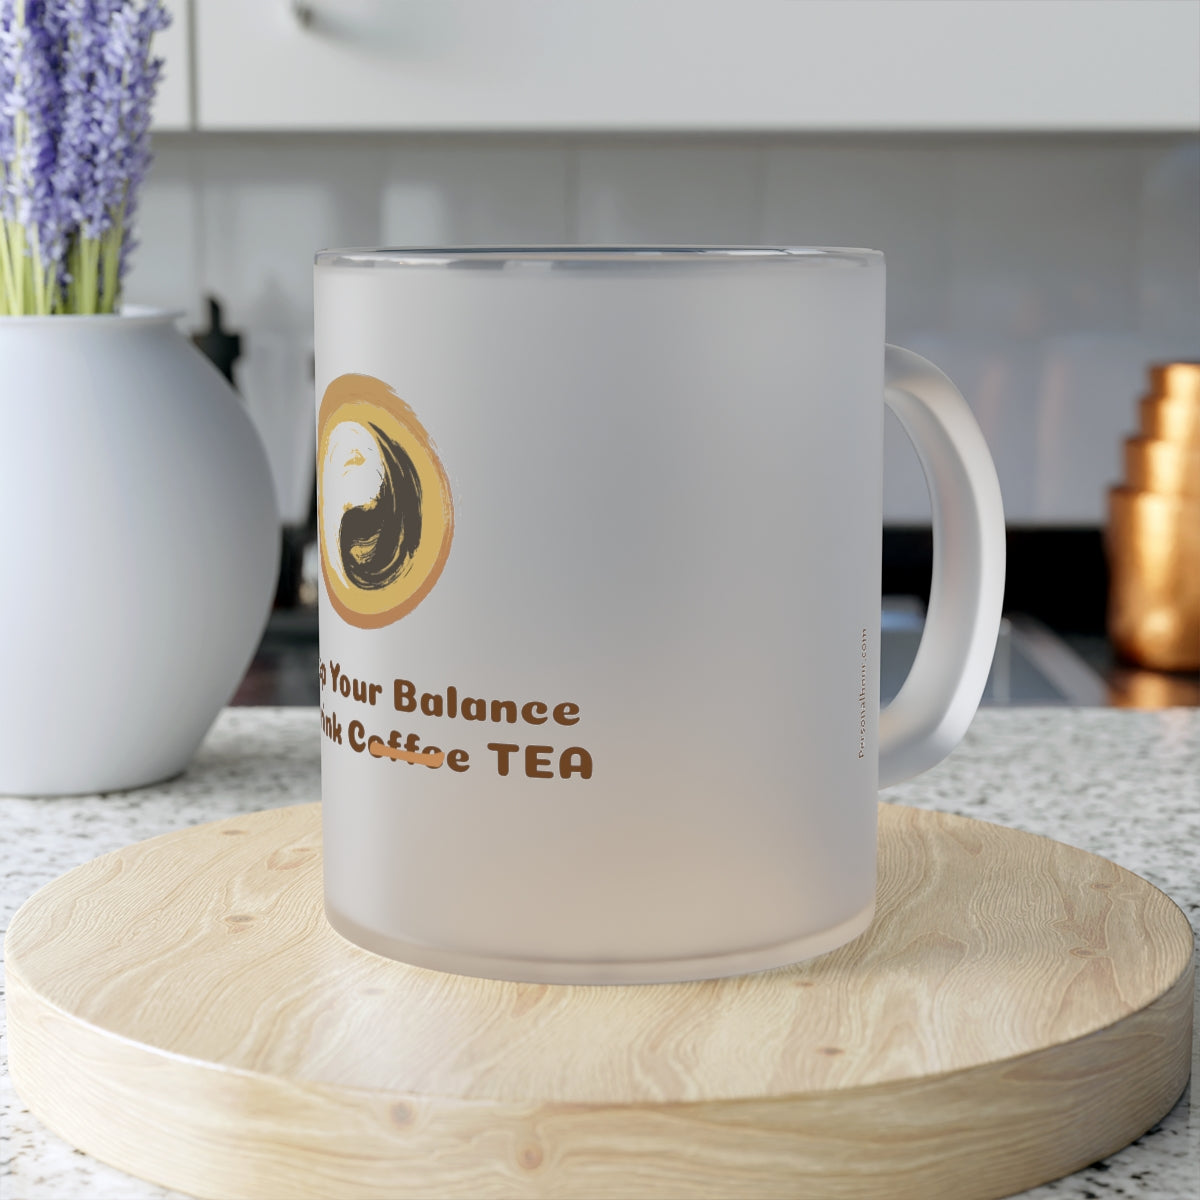 Keep your balance and drink tea - tea cups - gifts for tea lovers